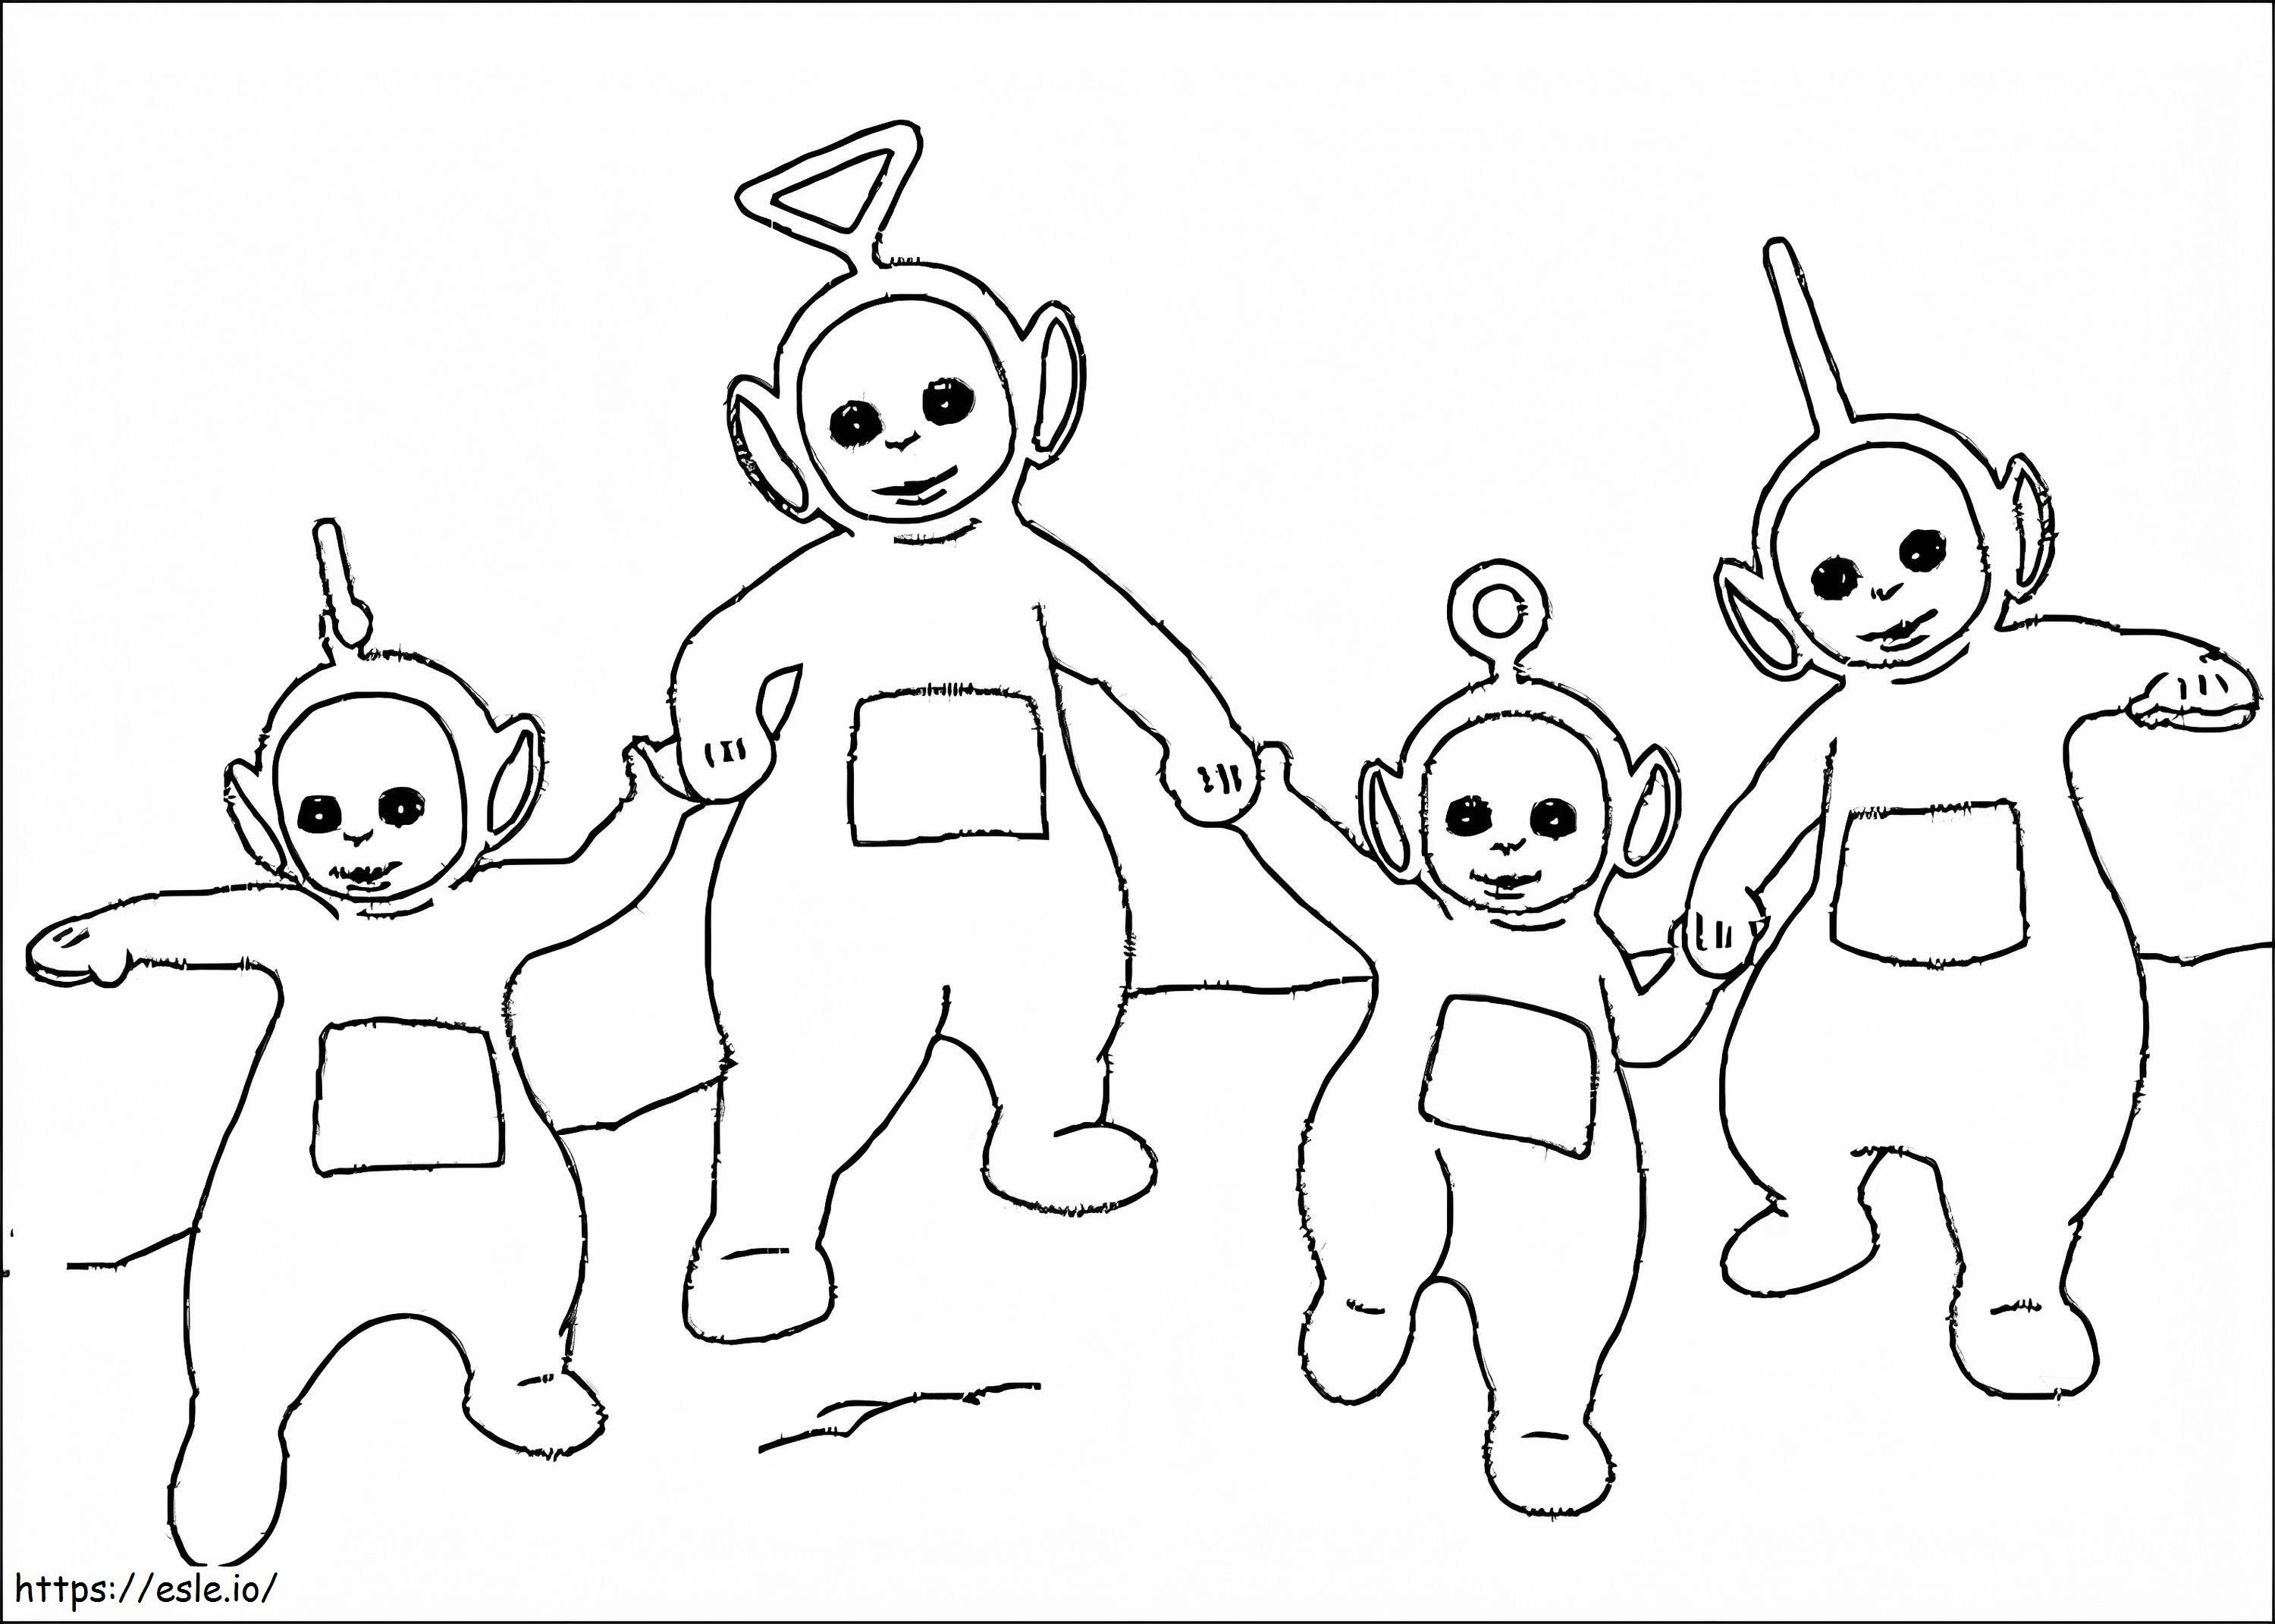 Teletubbies Coloring Page 2 coloring page